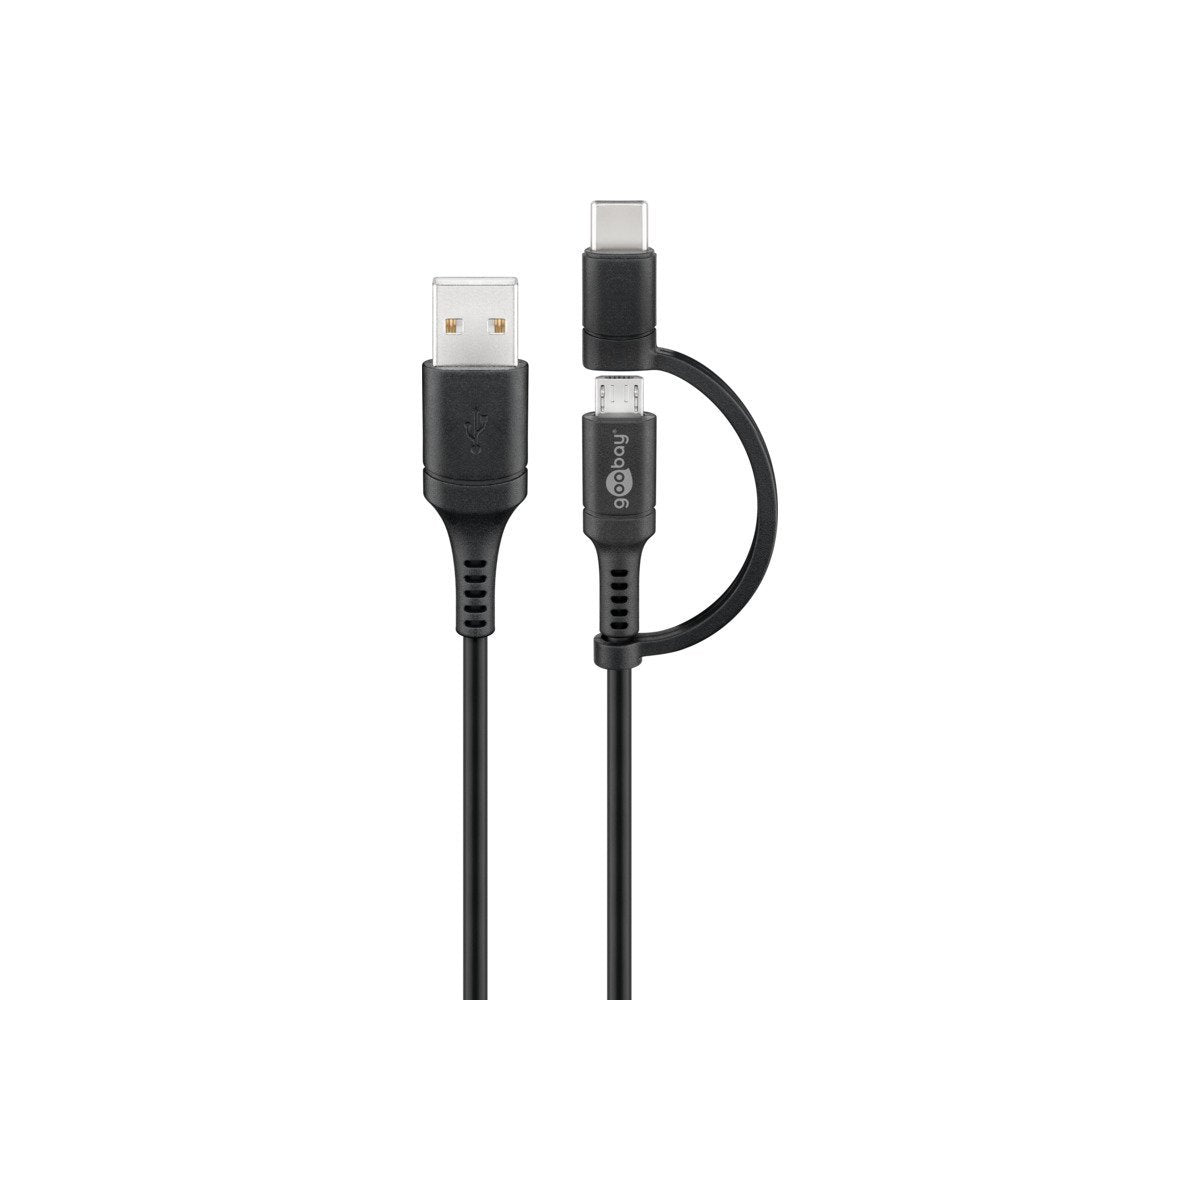 Goobay USB 2.0 cable (USB-C to micro-B 2.0) 1M - Cables - Techunion -